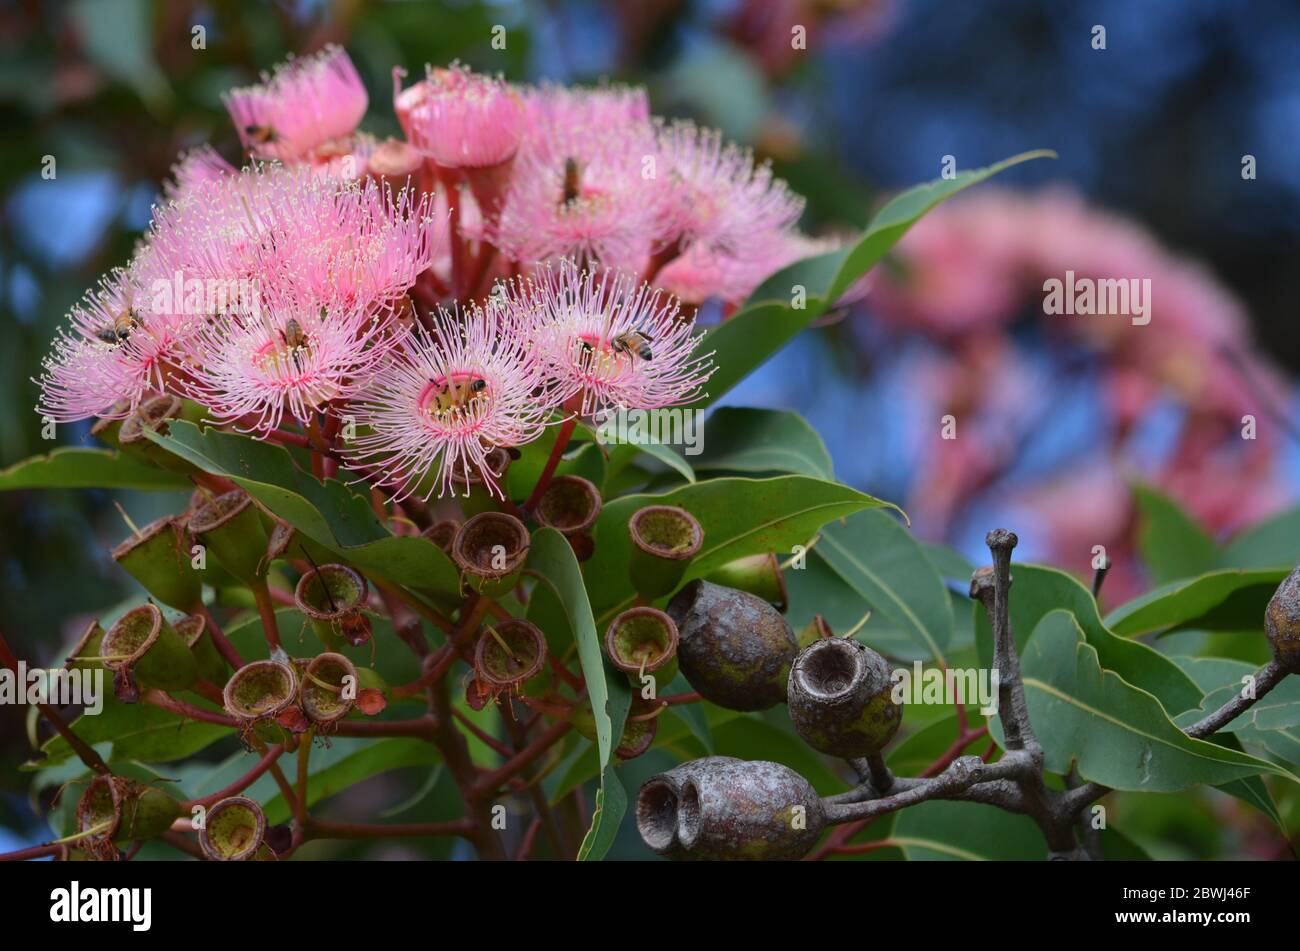 Bush Flowers High Resolution Stock and Images